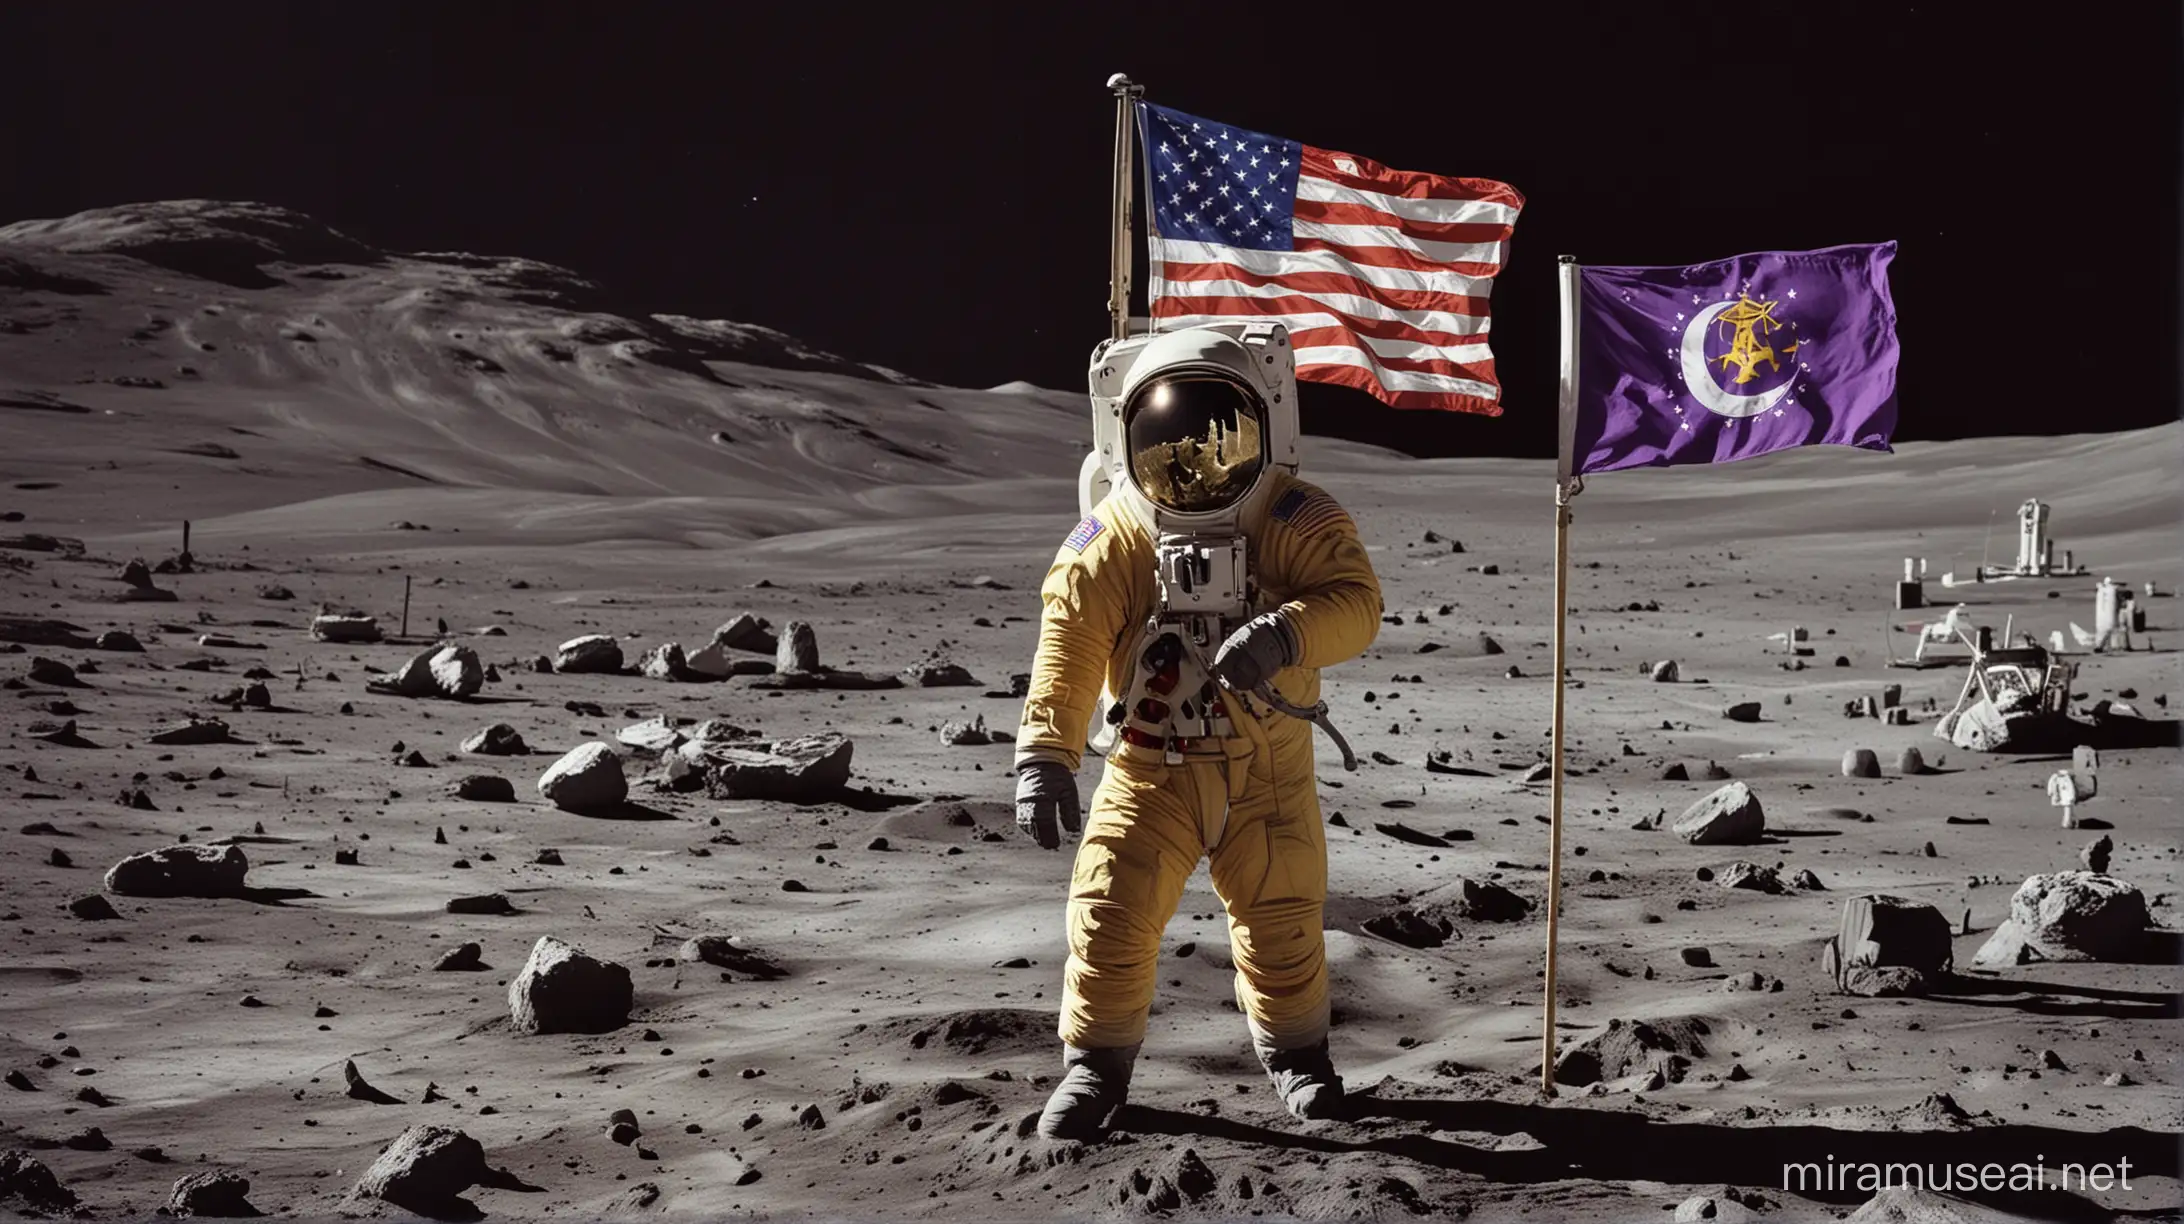 Imagine/Astronaut on moon,flag in hand with this "π" logo,no American flag,flag must be of purple colour, "π" logo of yellow colour
